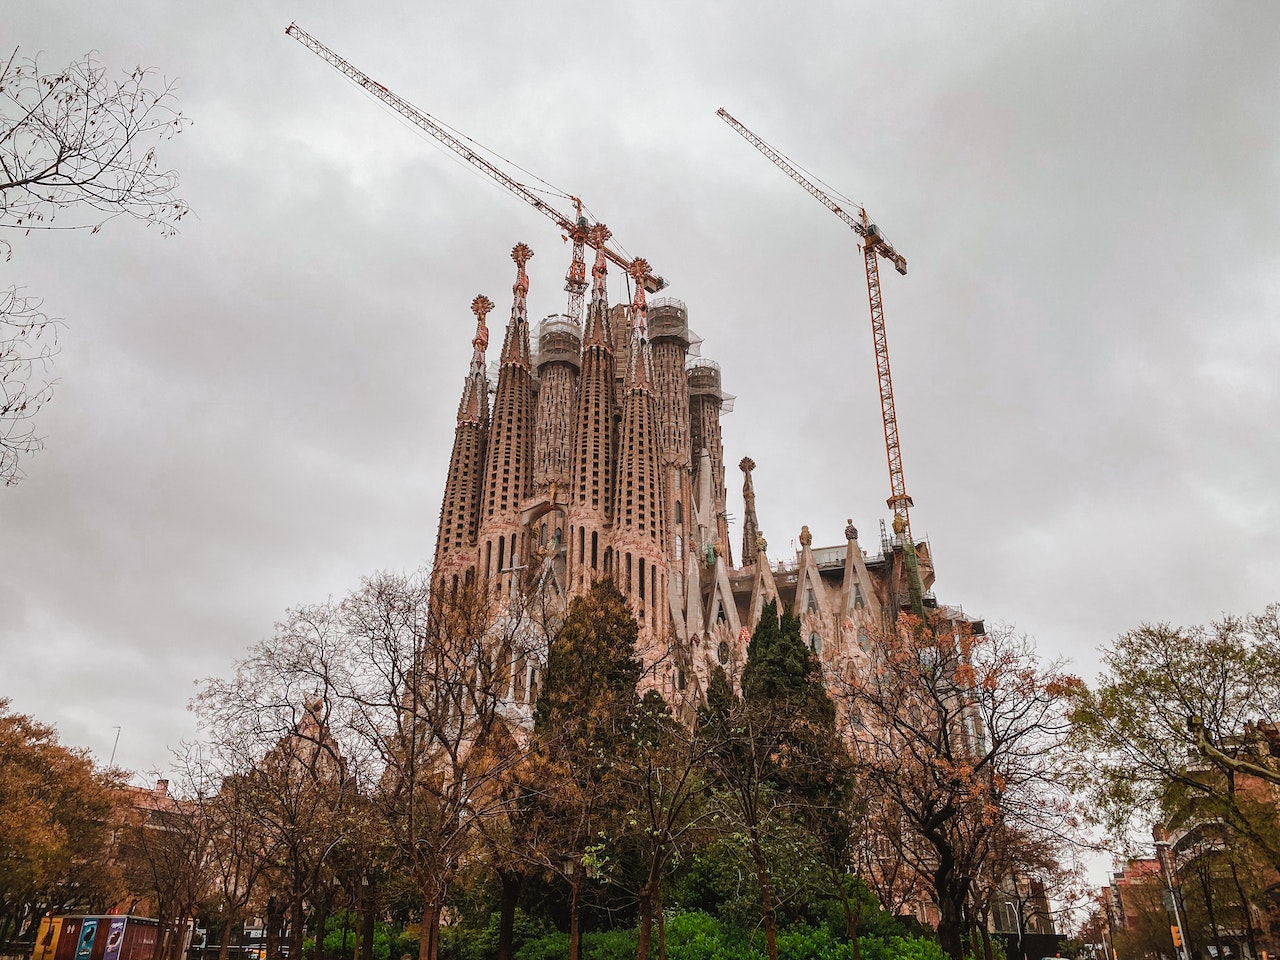 Sagrada Familia: The Most Famous Unfinished Miracle